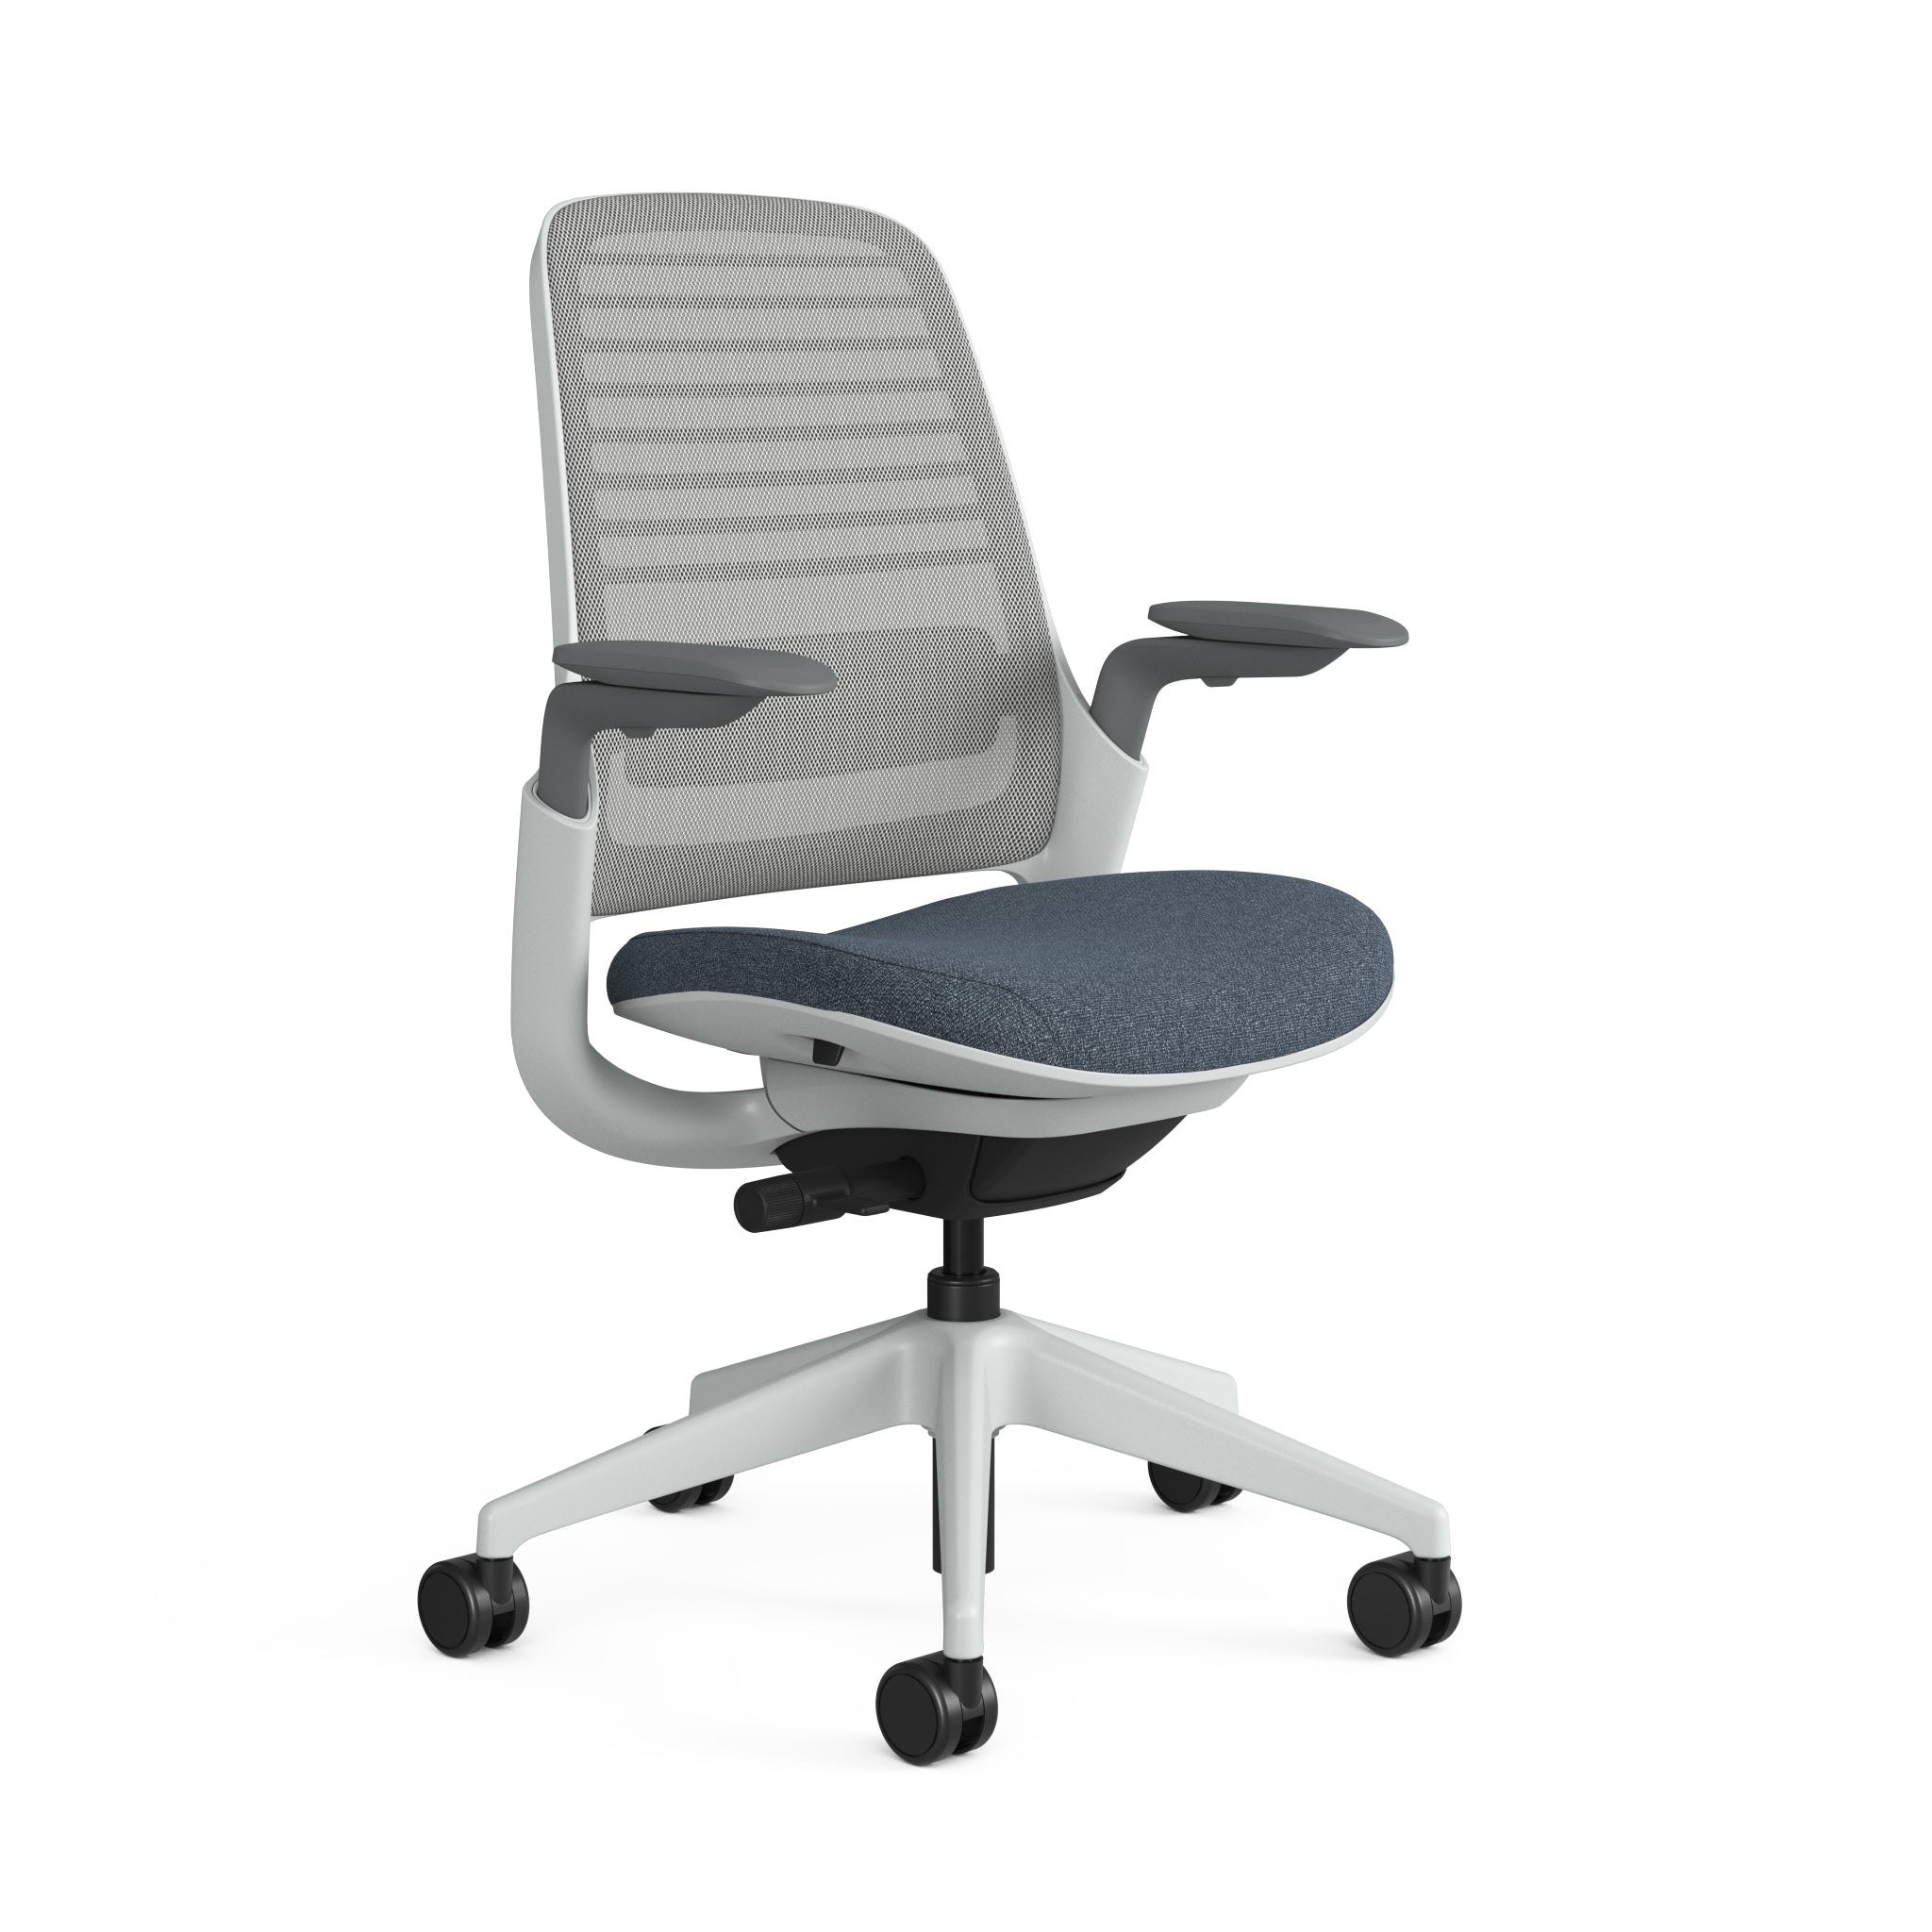 Meshback 3D Microknit Nickel; Seat fabric Medley Blue; Frame Seagull